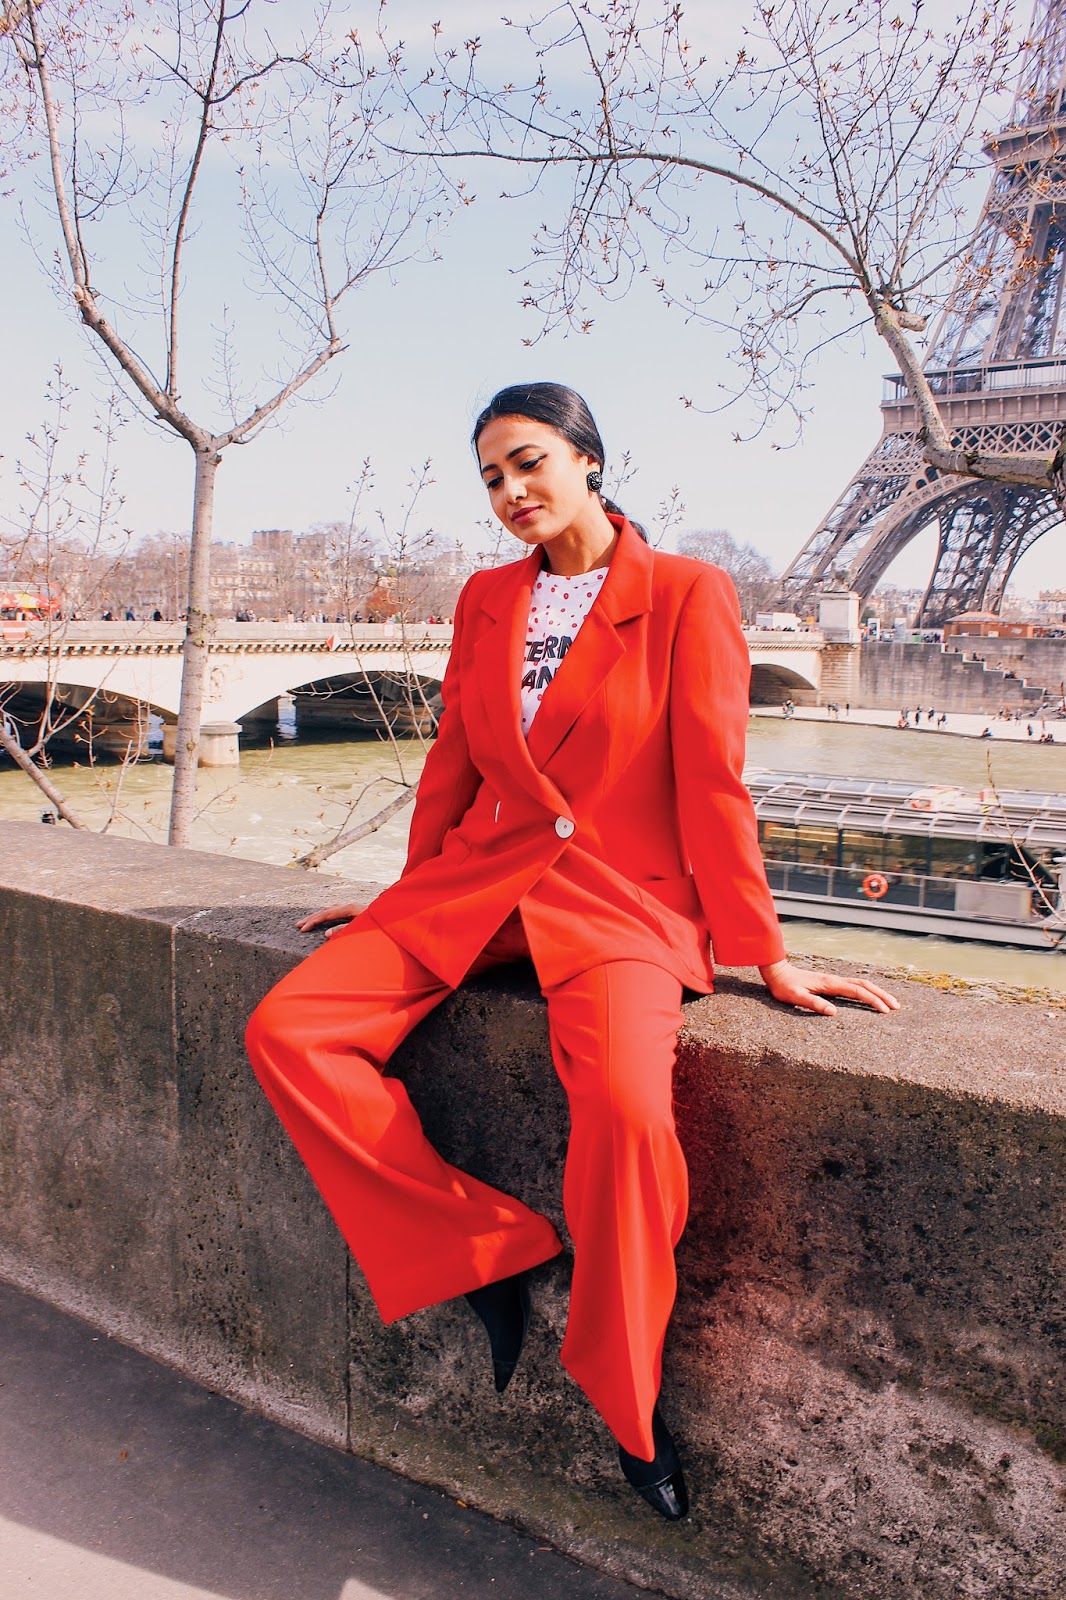 zara pant suit, zara suit, red matching set, pant suit, trouser suit, red pant suit, red trouser suit, style a suit, effortless chic, casual chic, wear in paris, paris outfit, wide leg trouser, double breasted blazer, indian blogger, uk blog, sock boots, paris red